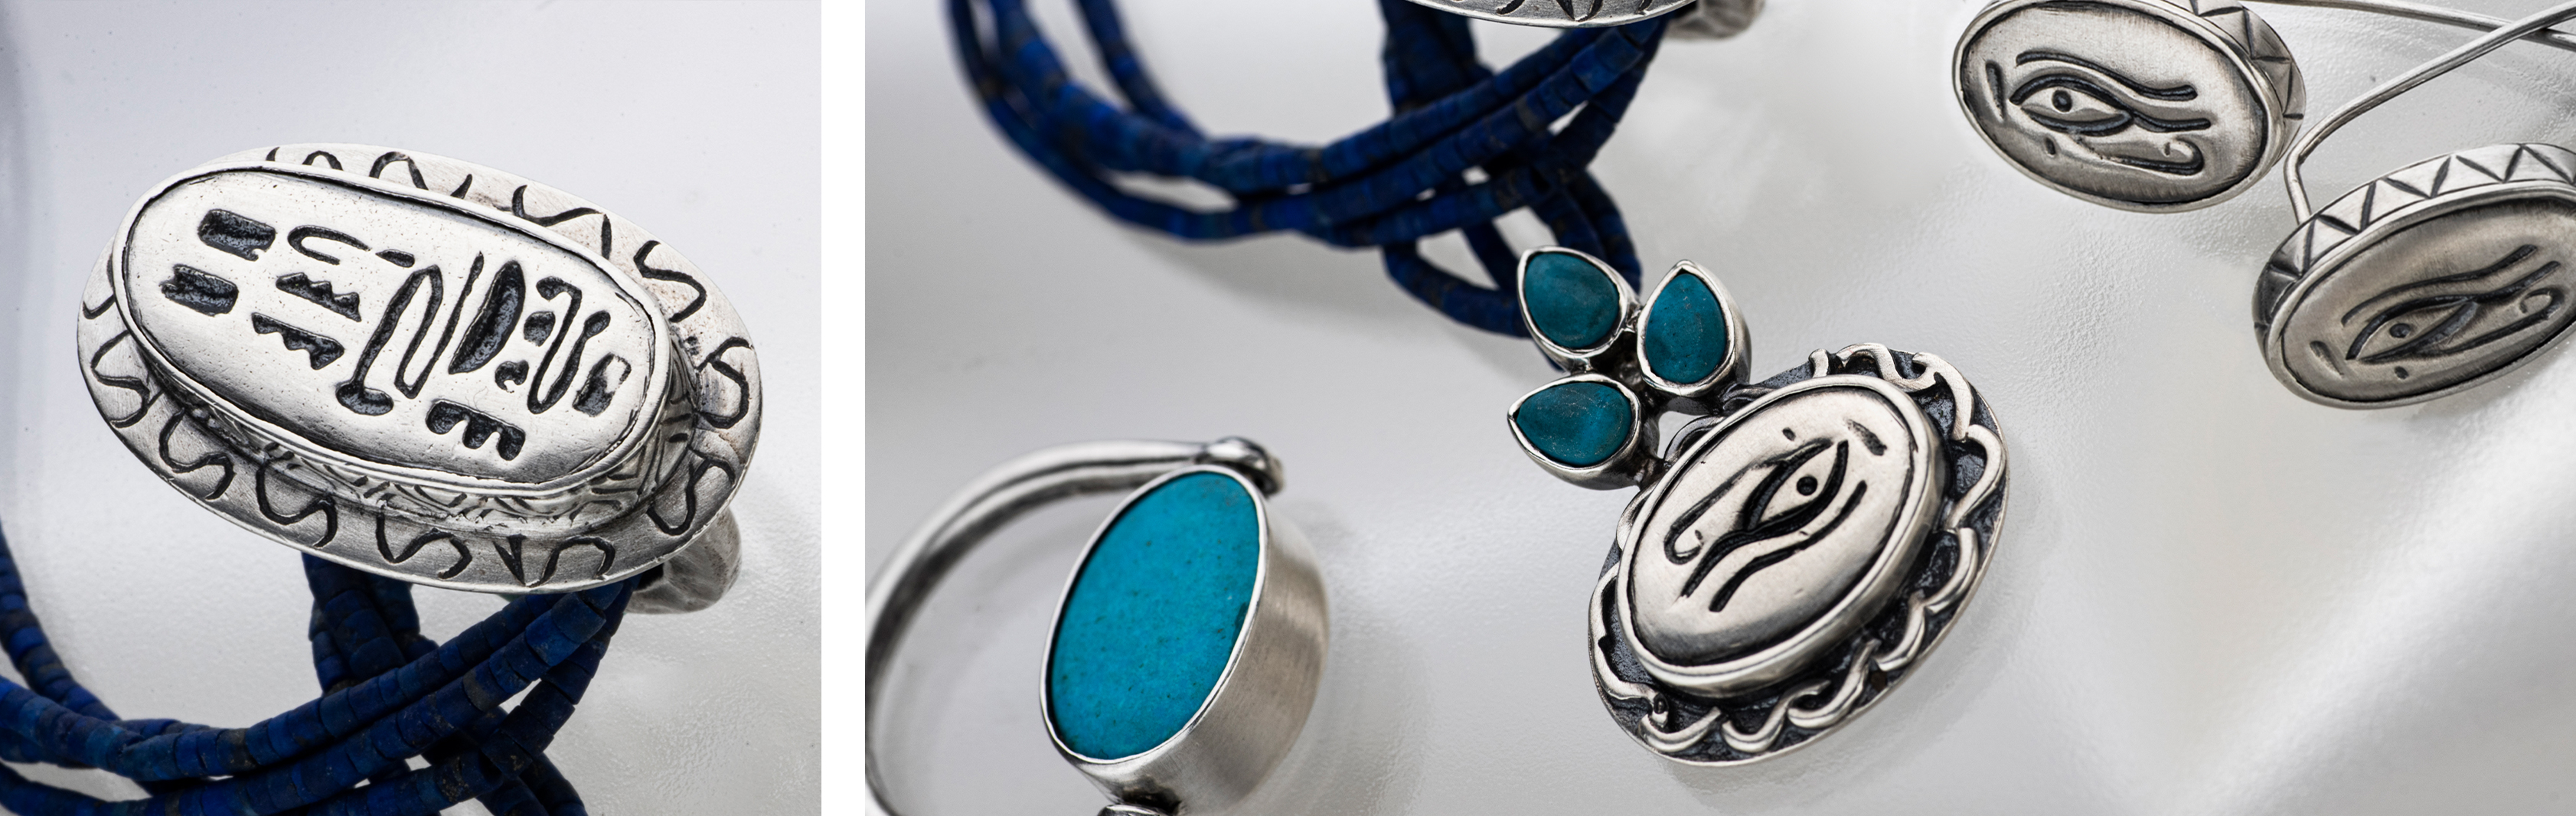 The Eye of Ra Collection | 925 Sterling Silver Jewelry set with Turquoise and Lapis